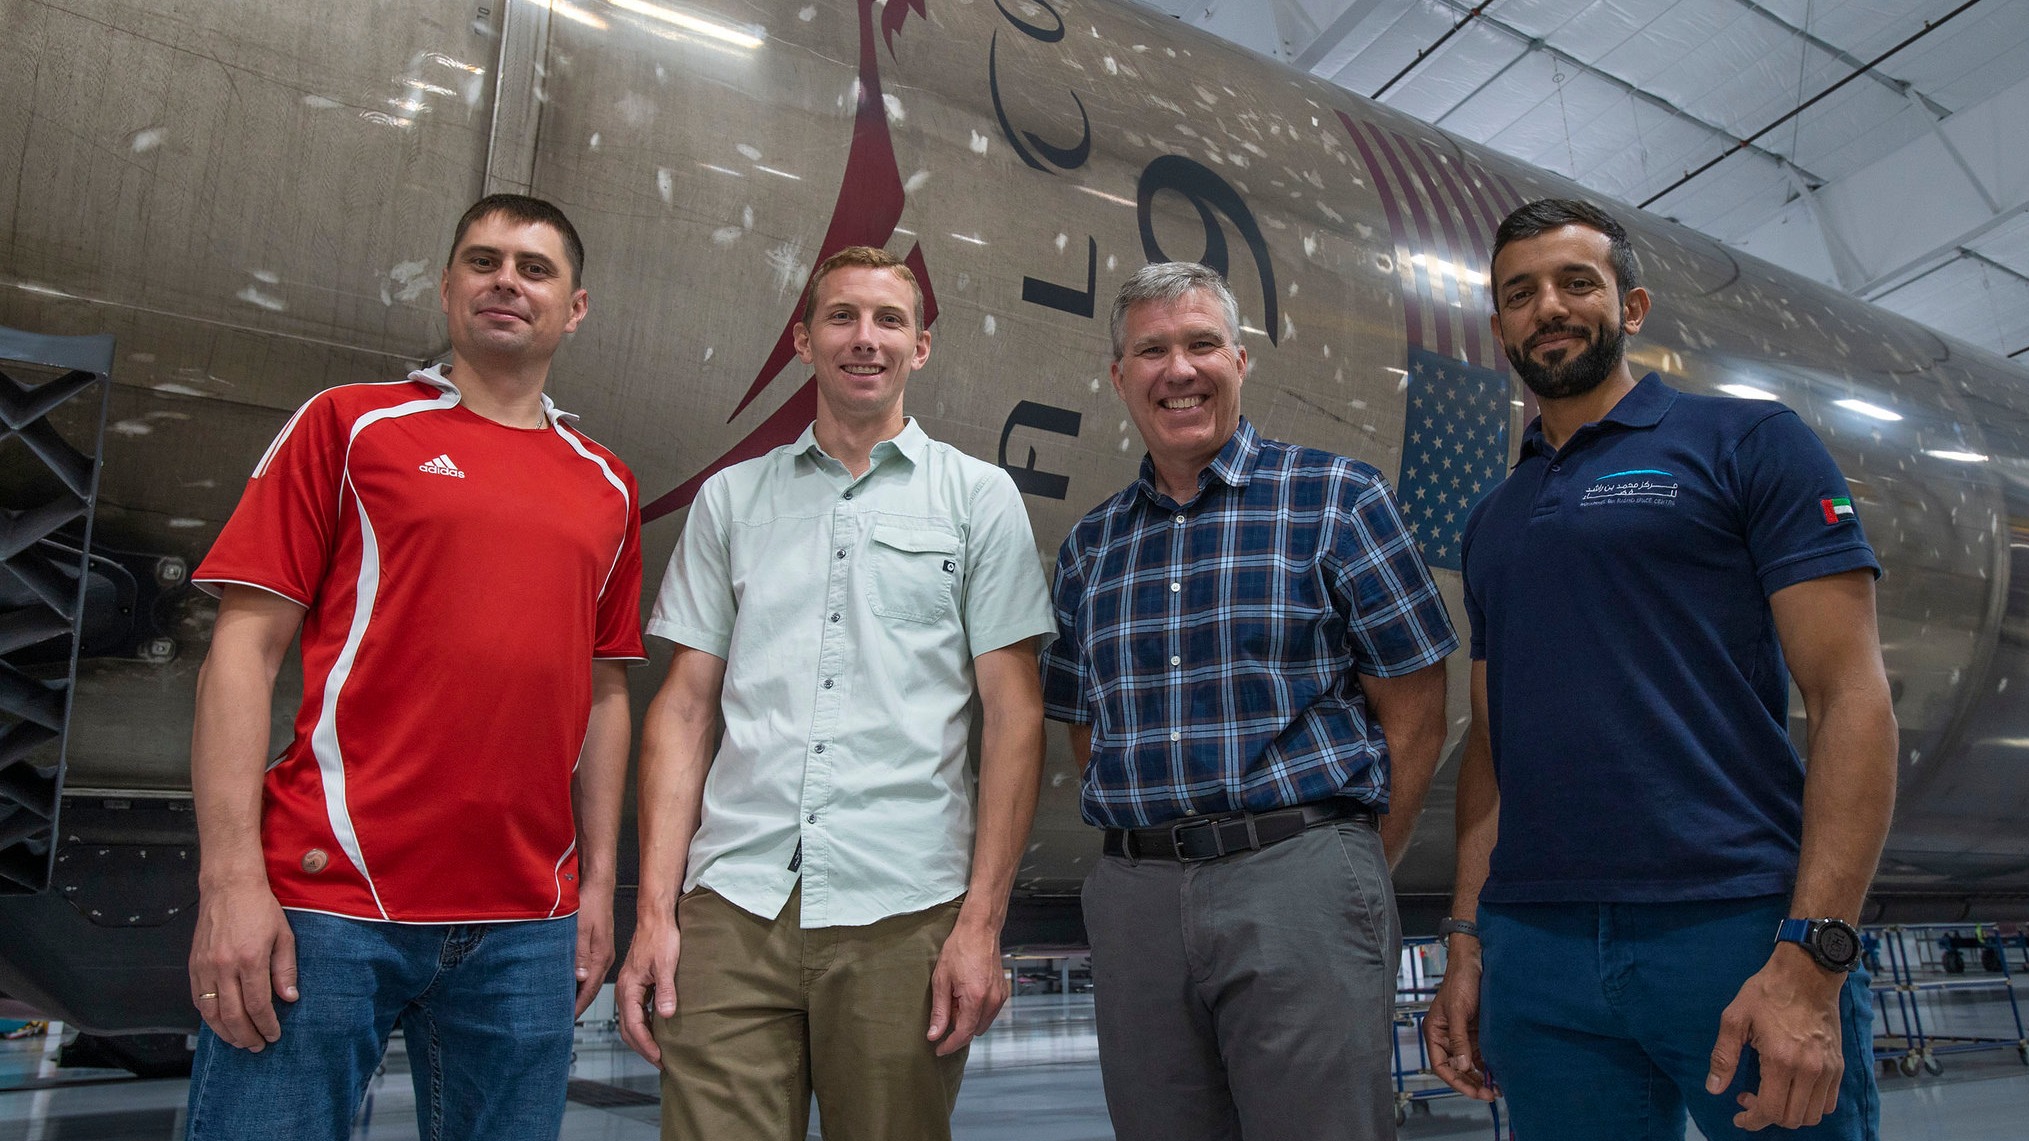 The next crewed launch to the International Space Station will be Crew-6, NASA's rotation mission aboard a SpaceX spacecraft.  From left are Andrey Fedyaev of Russia, Warren of NASA "woody" Hoberg, Stephen Bowen of NASA and Sultan Al Neyadi of the United Arab Emirates in front of the SpaceX Falcon 9 rocket.